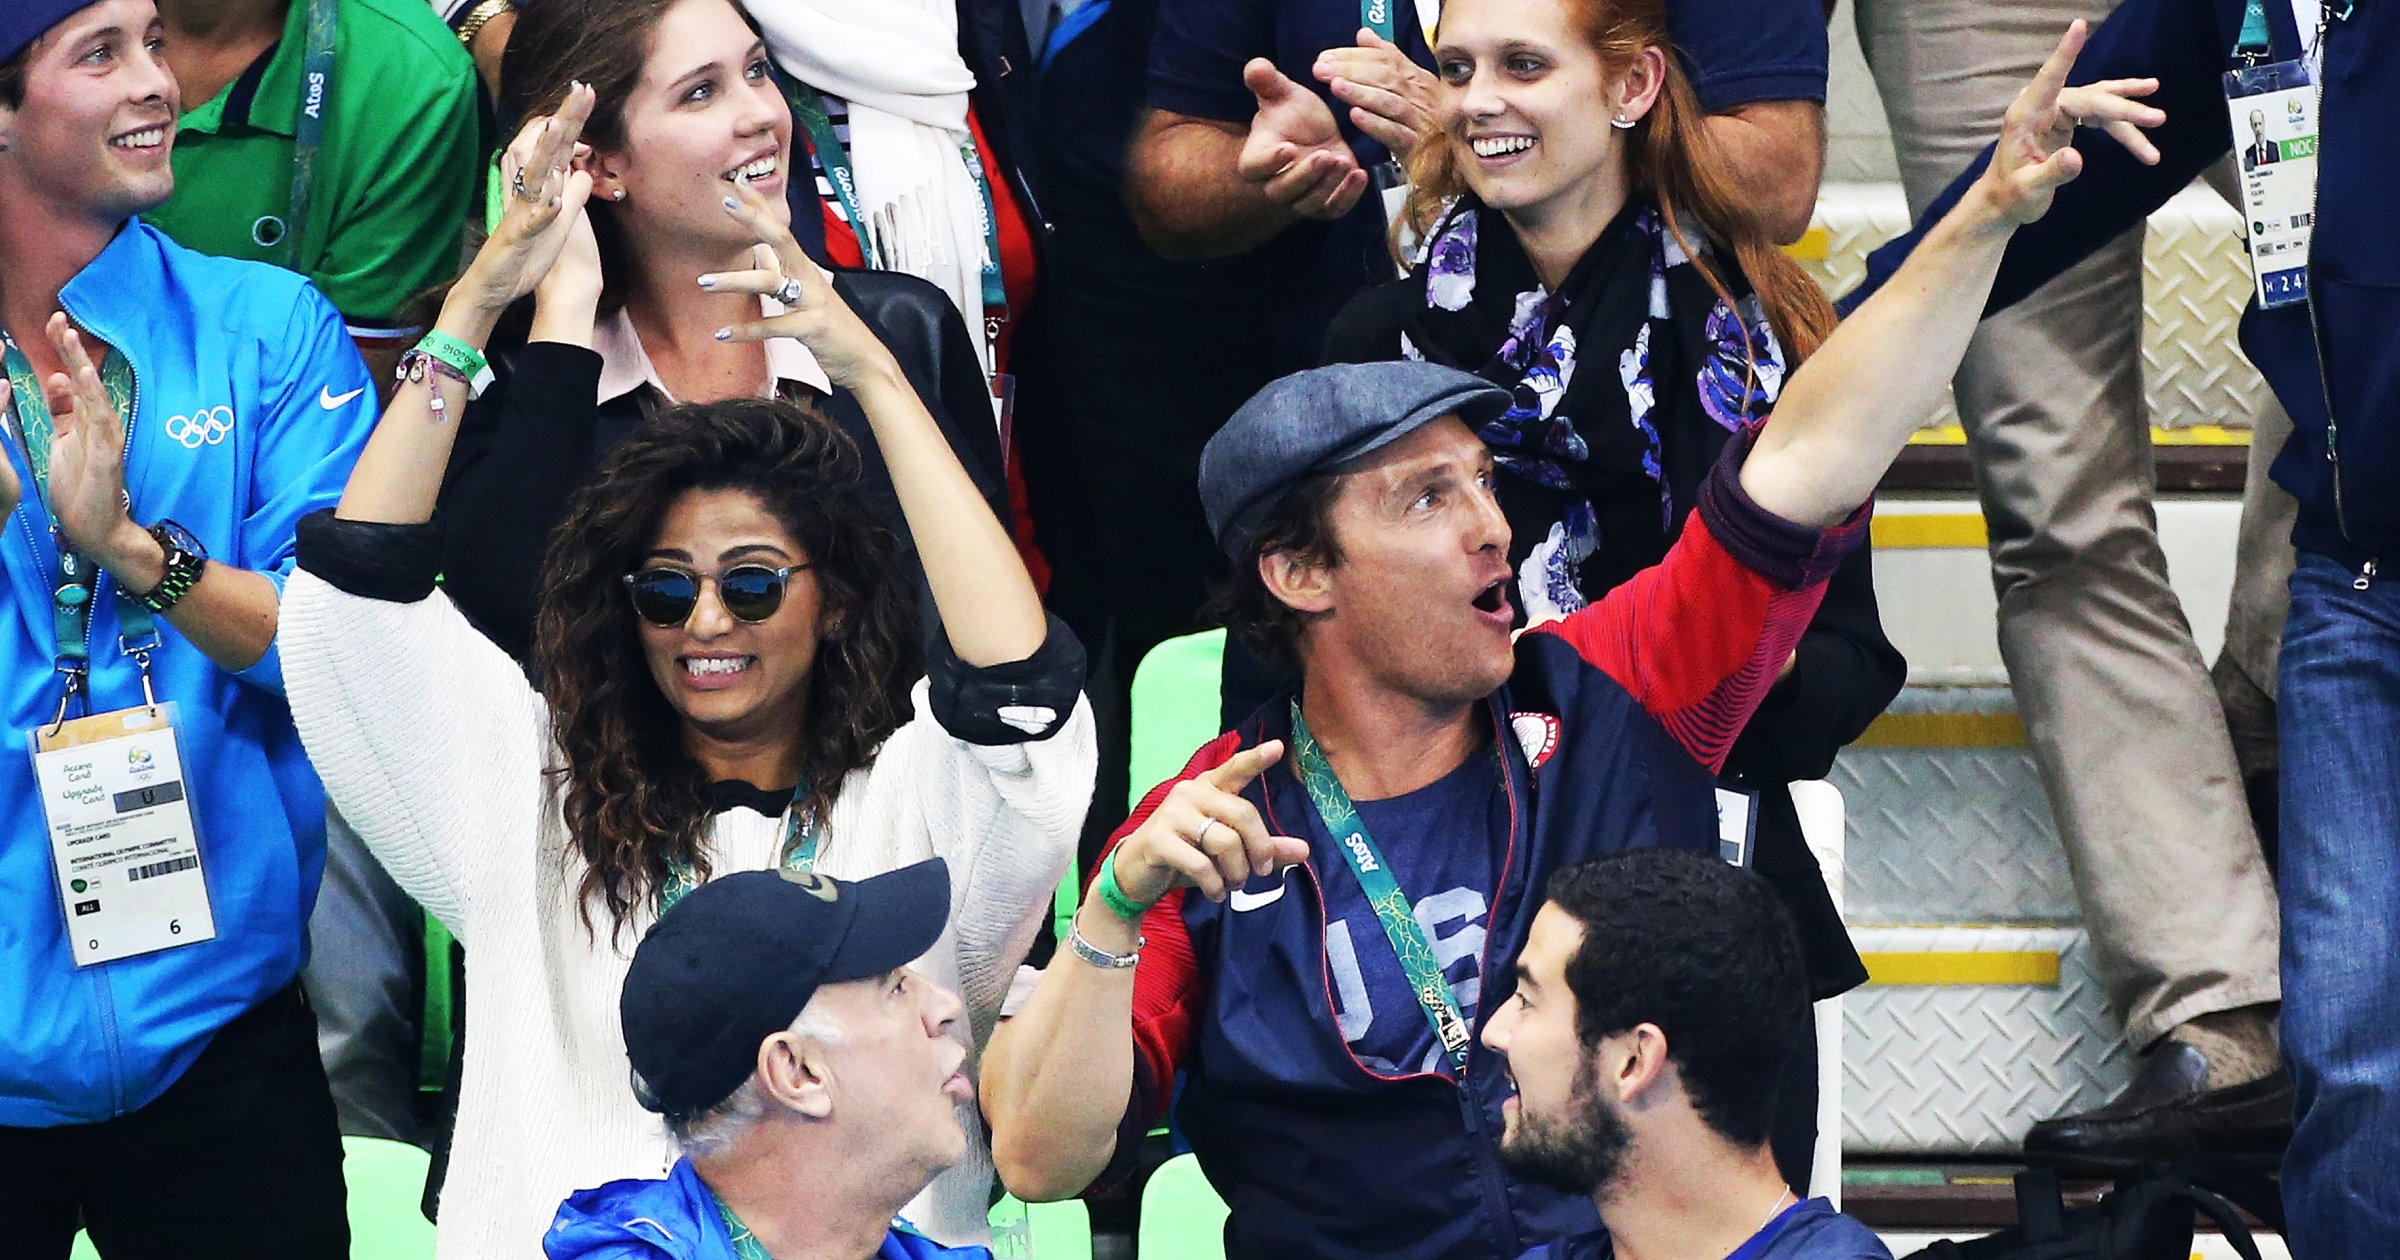 Matthew McConaughey and his wife Camila Alves attend the swimming finals on day 5 of the Rio 2016 Olympic Games at Olympic Aquatics Stadium, on Aug. 10, 2016 in Rio de Janeiro, Brazil.